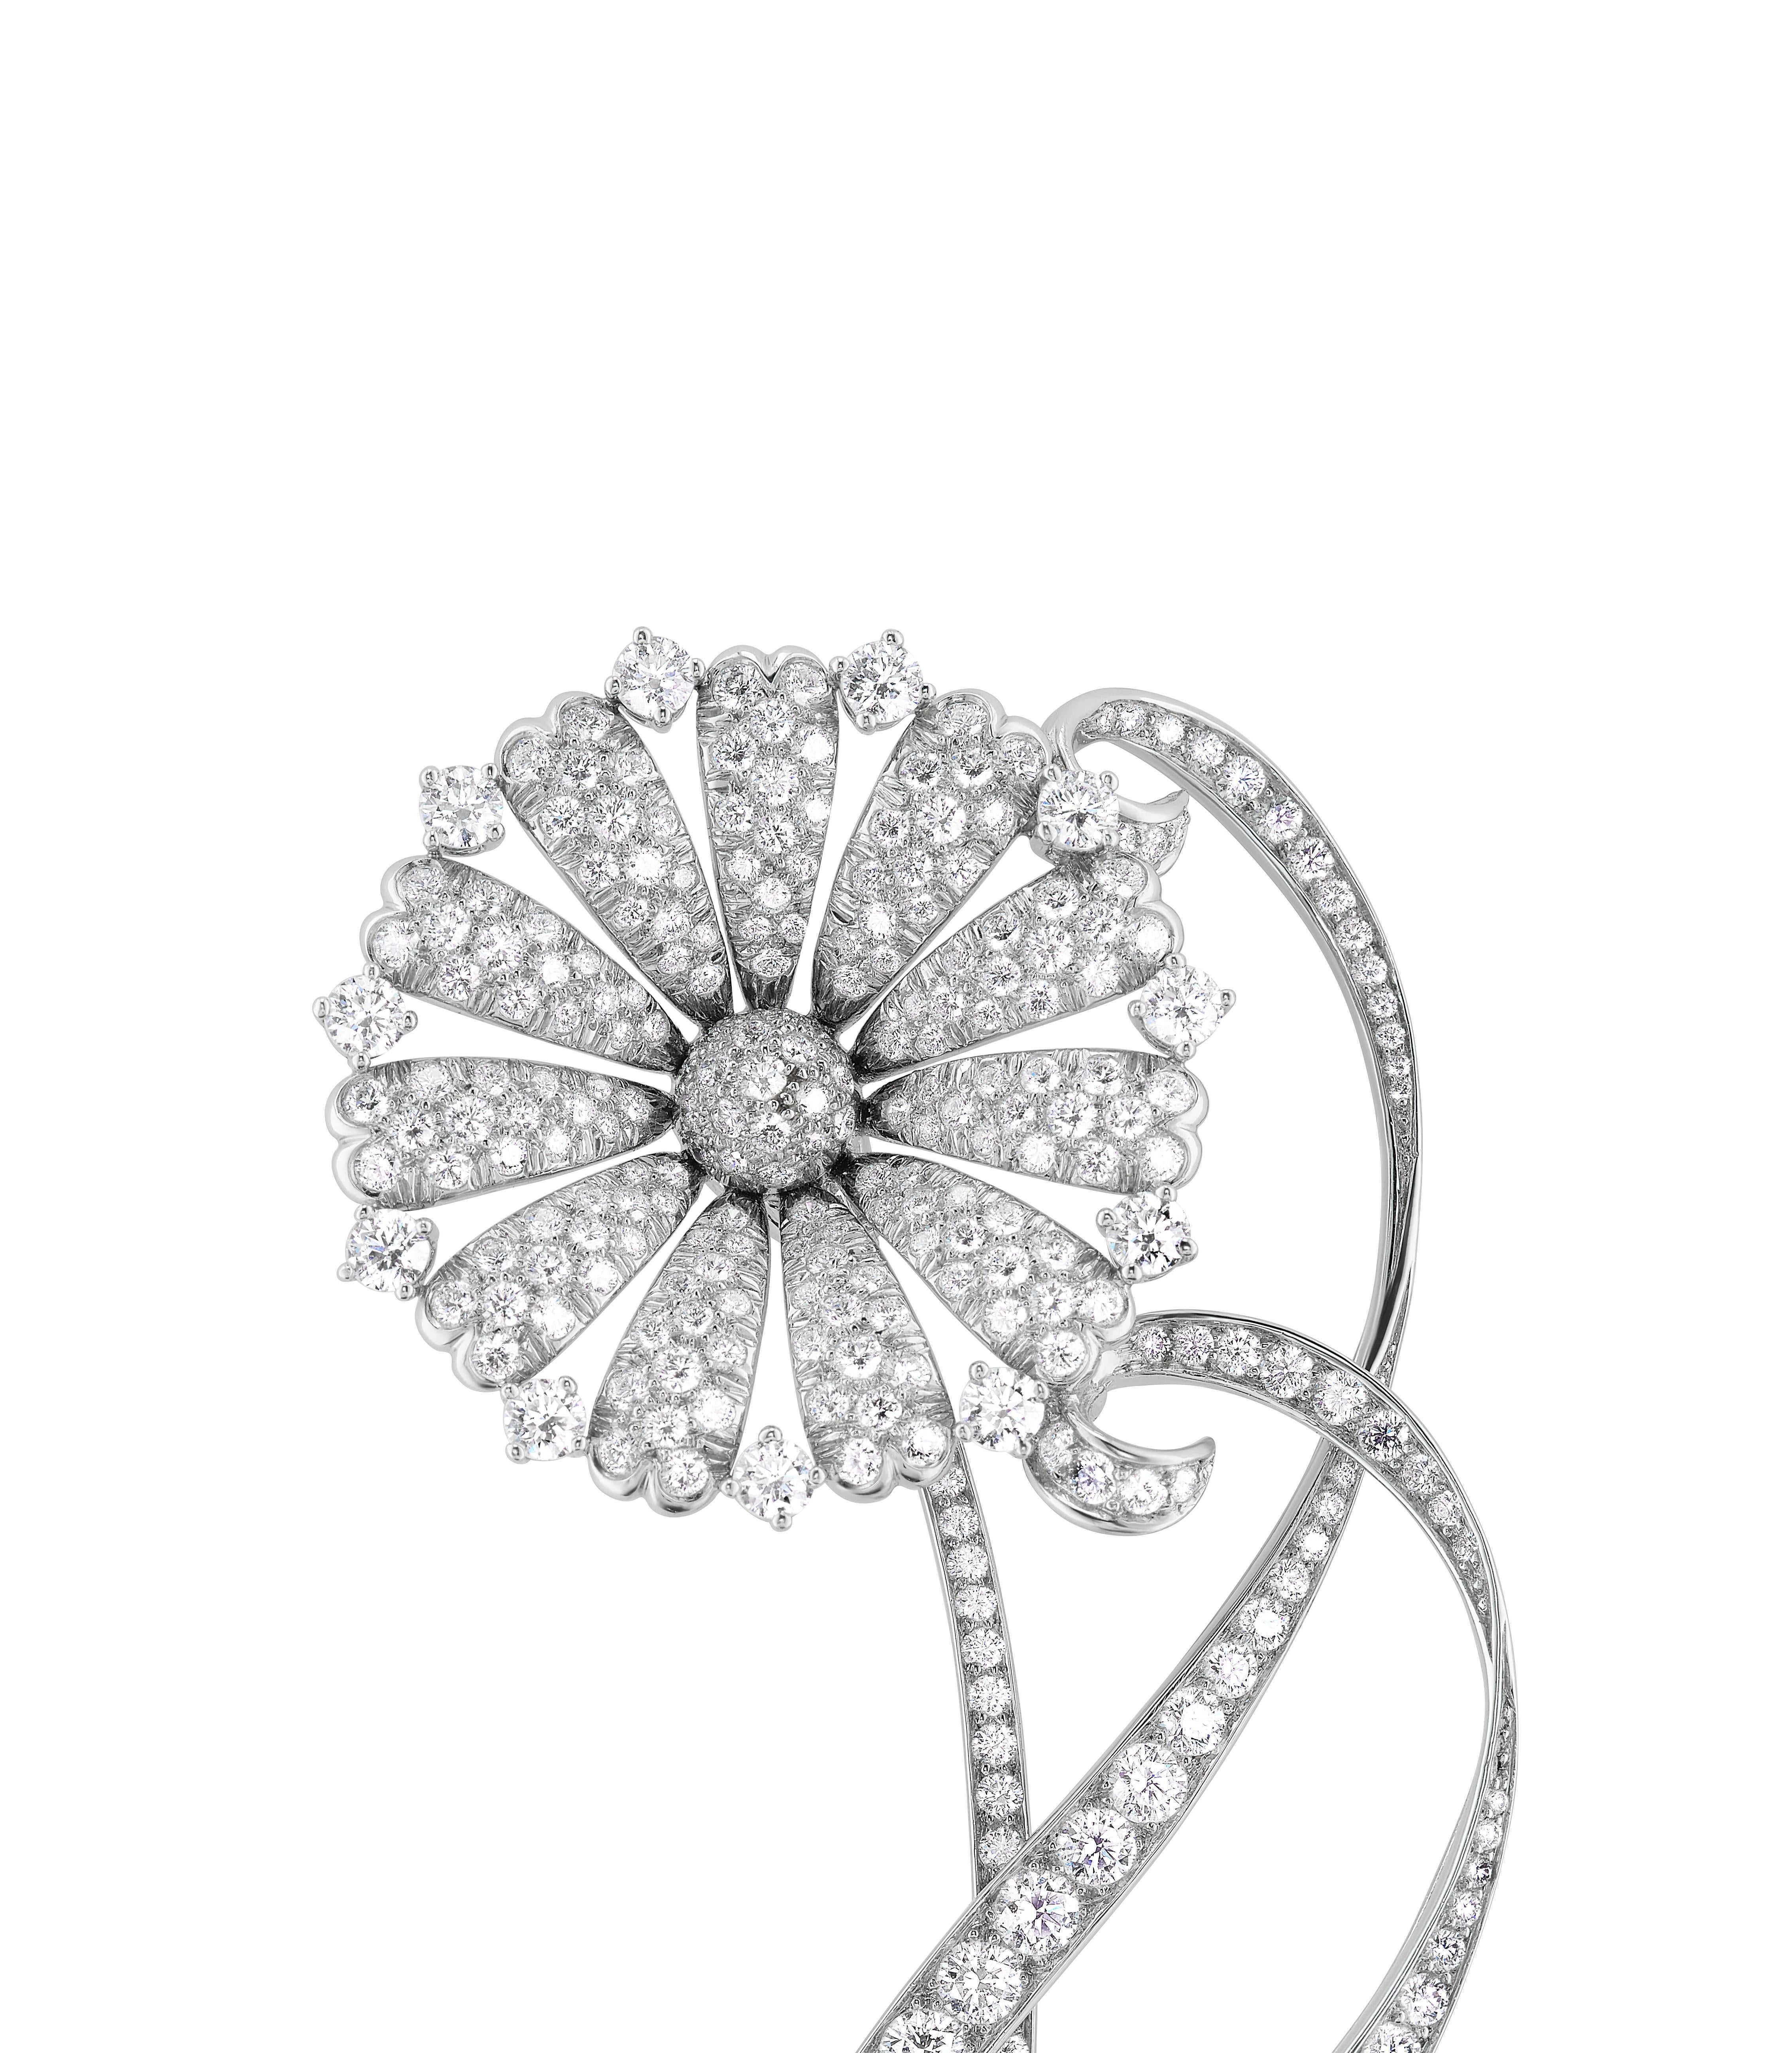 This exquisite Tiffany & Co. Archival Daisy Brooch contains round brilliant diamonds weighing approximately 6.38 total carats set in platinum. Beyond its impressive size exists a fluidity and harmonizing detail that is a magnificent example of